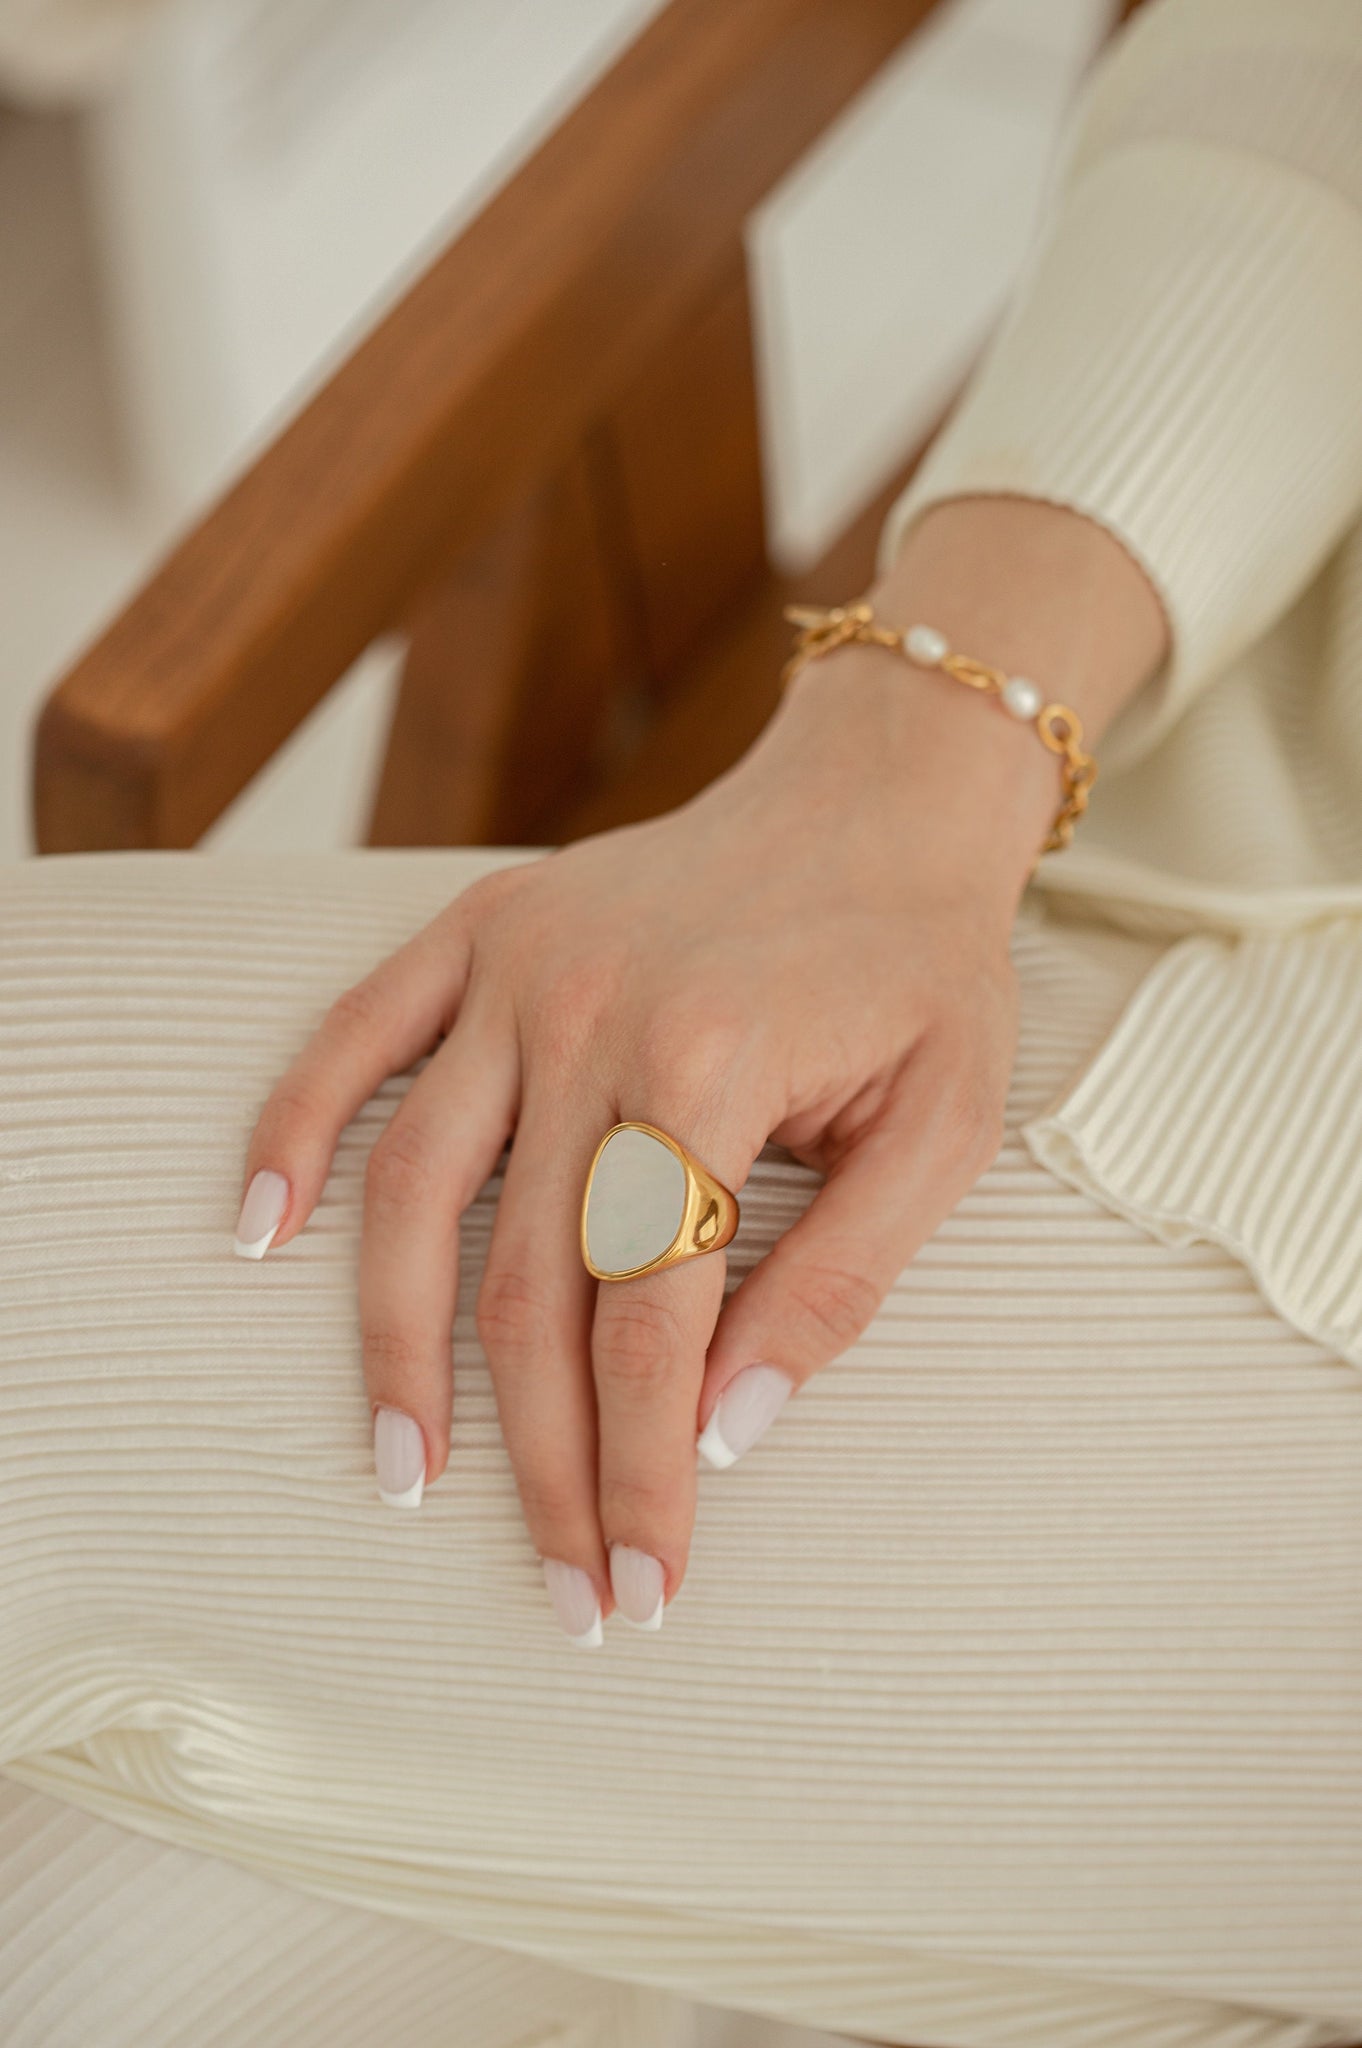 White Shell Ring, 18K Gold, Jewelry For Mom, Rings For Women, Mothers Day Gift, Waterproof Mother Ring, New Mom Gift, Unique Summer Jewelry